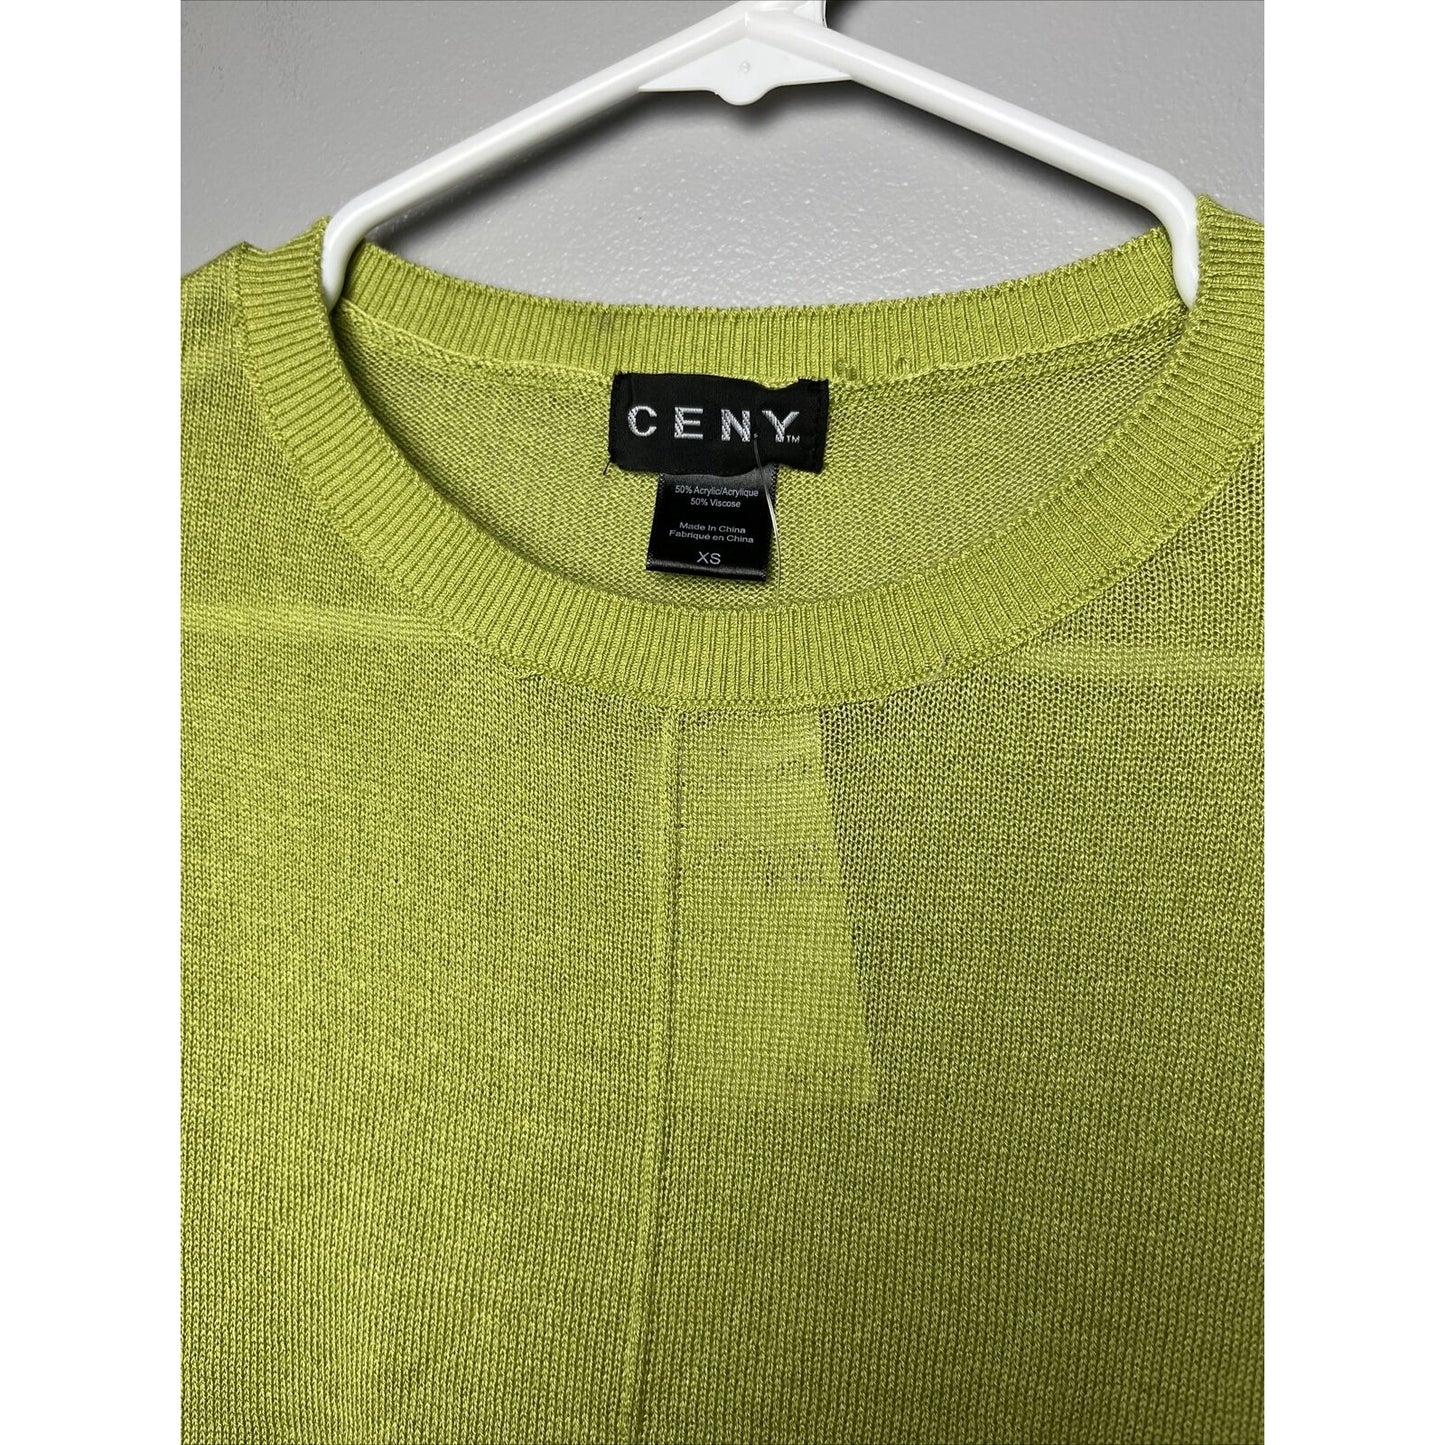 Ceny Womens Size XS Long Sleeve Round Neck Side Slit Sweater Top Neon Green